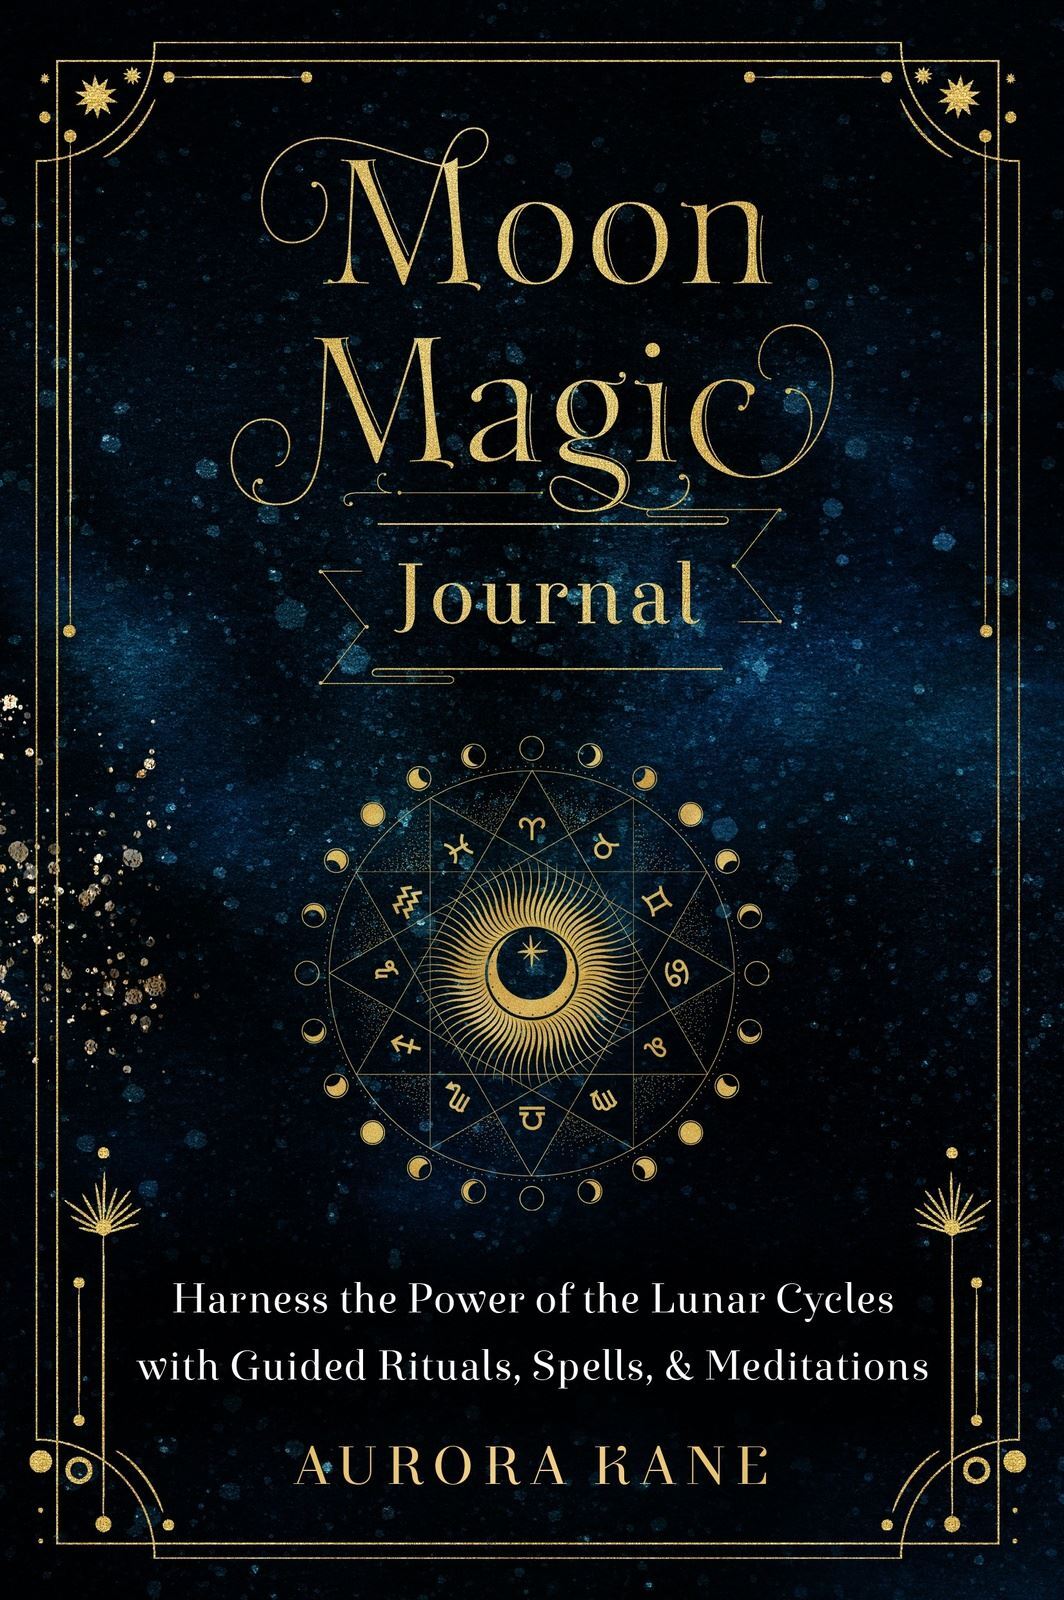 Moon Magic Journal: Harness the Power of the Lunar Cycles with Guided Rituals, Spells, and Meditations: Volume 8